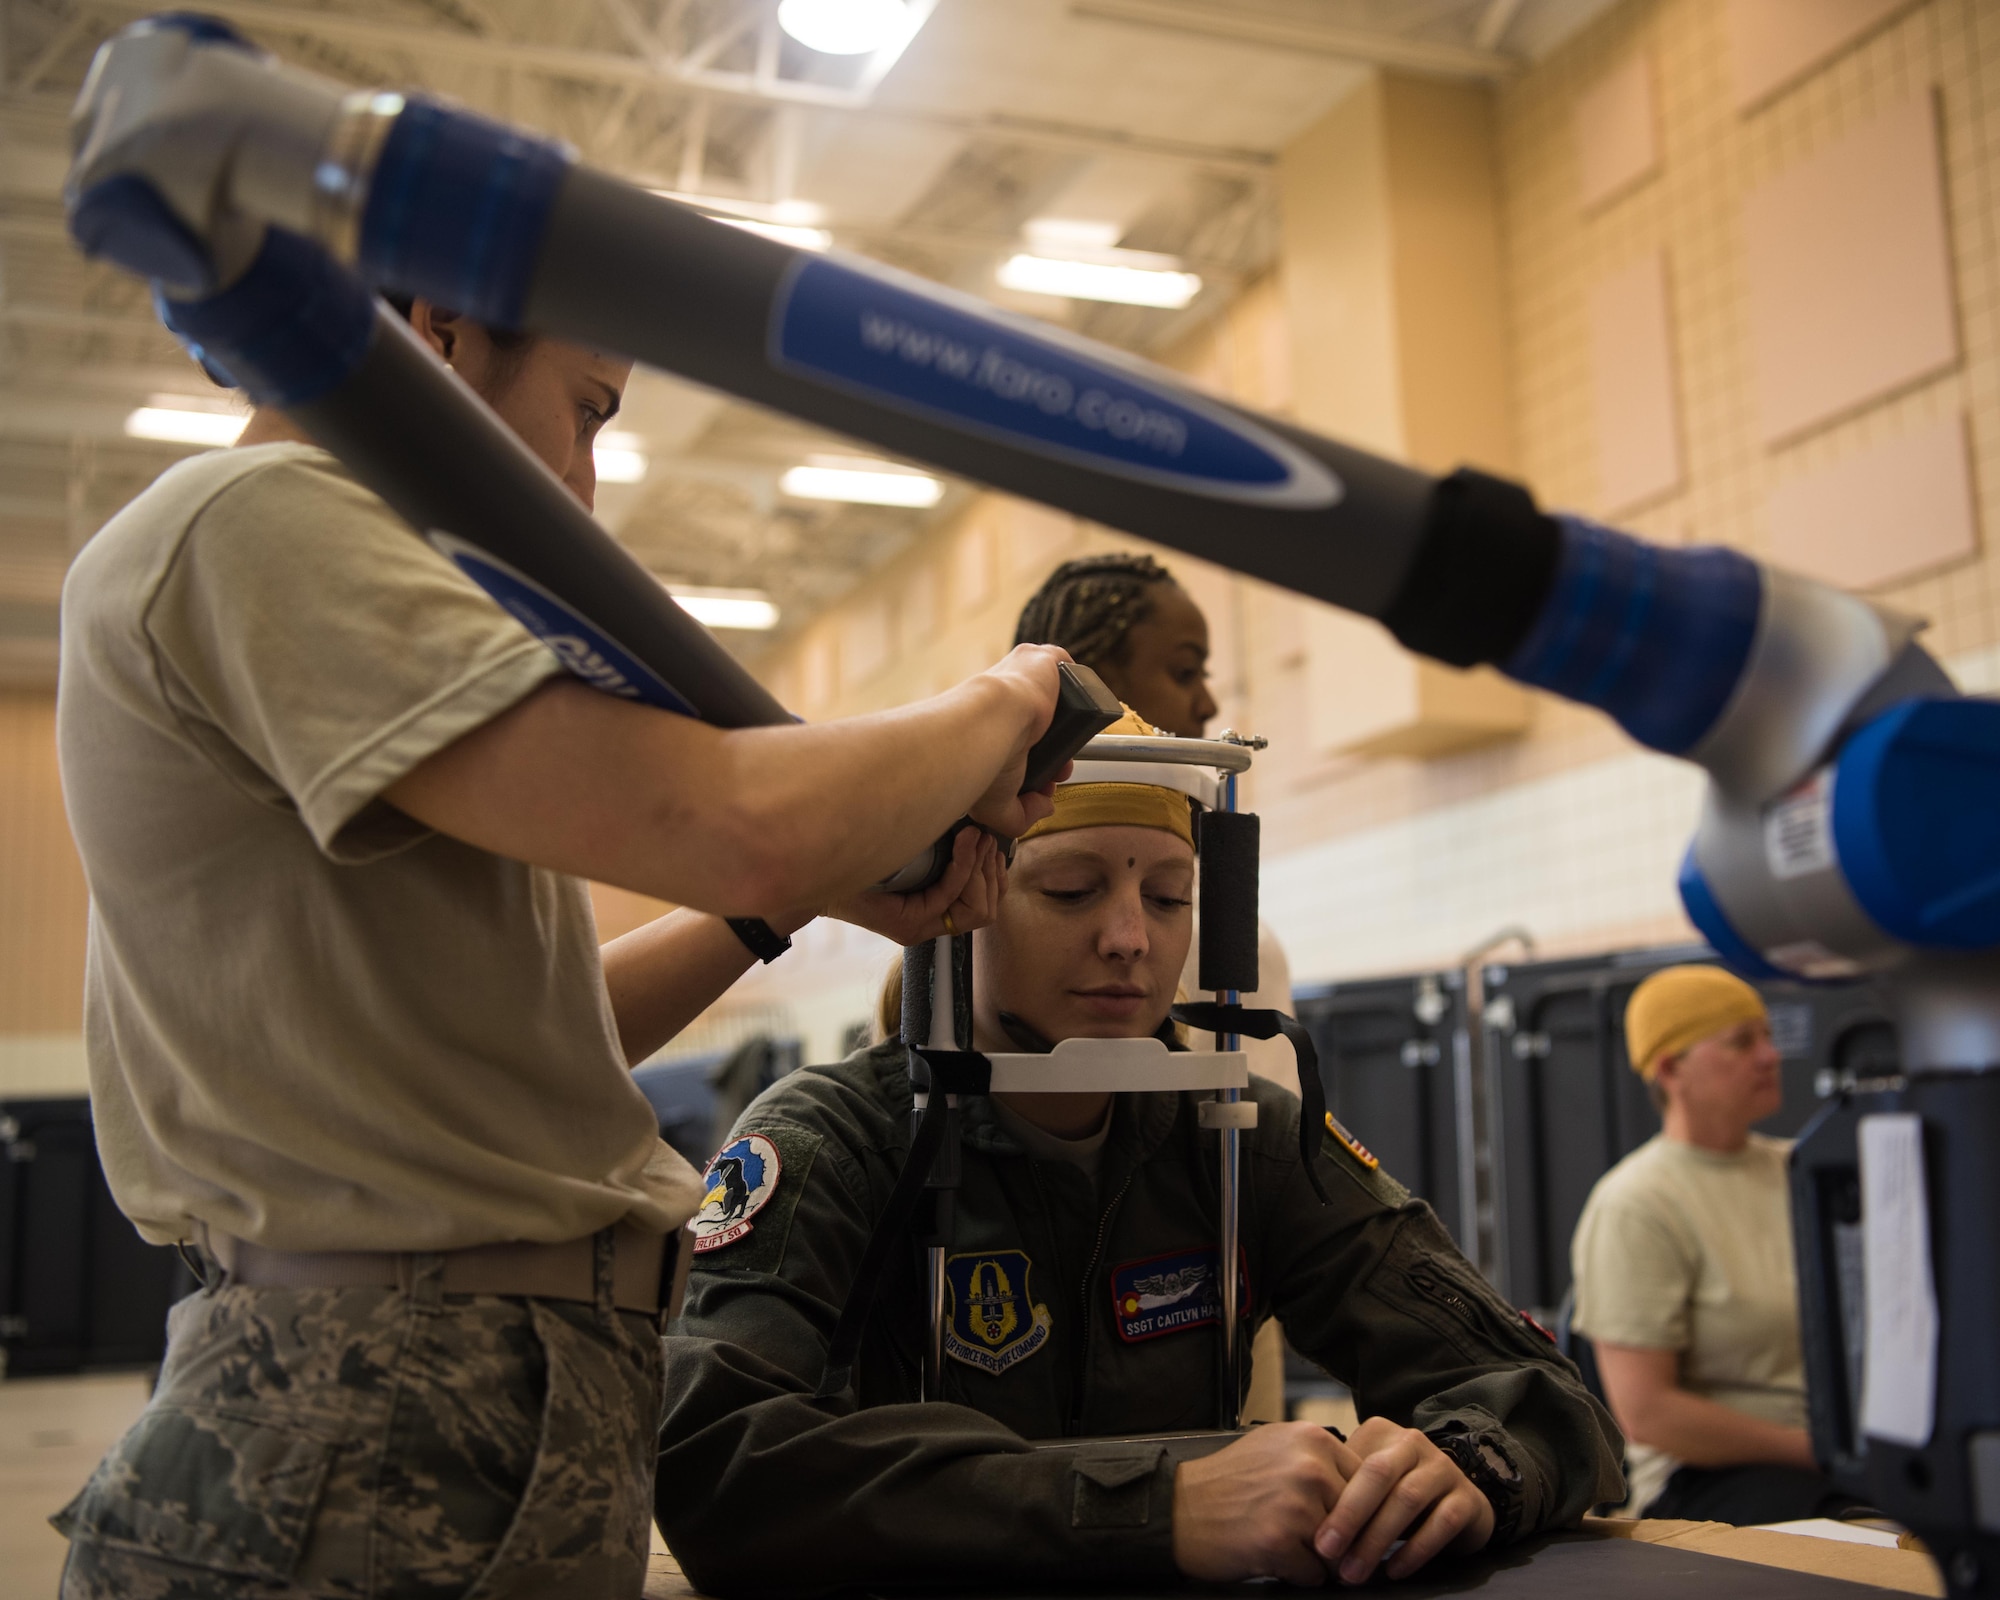 A U.S. Air Force Airman gets her head measured at the Female Fitment Event at Joint Base Langley-Eustis, Virginia, June, 4, 2019. The event allowed female aviators the chance to have their measurements taken and used for the designing of female flight equipment prototypes. (U.S. Air Force photo by Airman 1st Class Marcus M. Bullock)